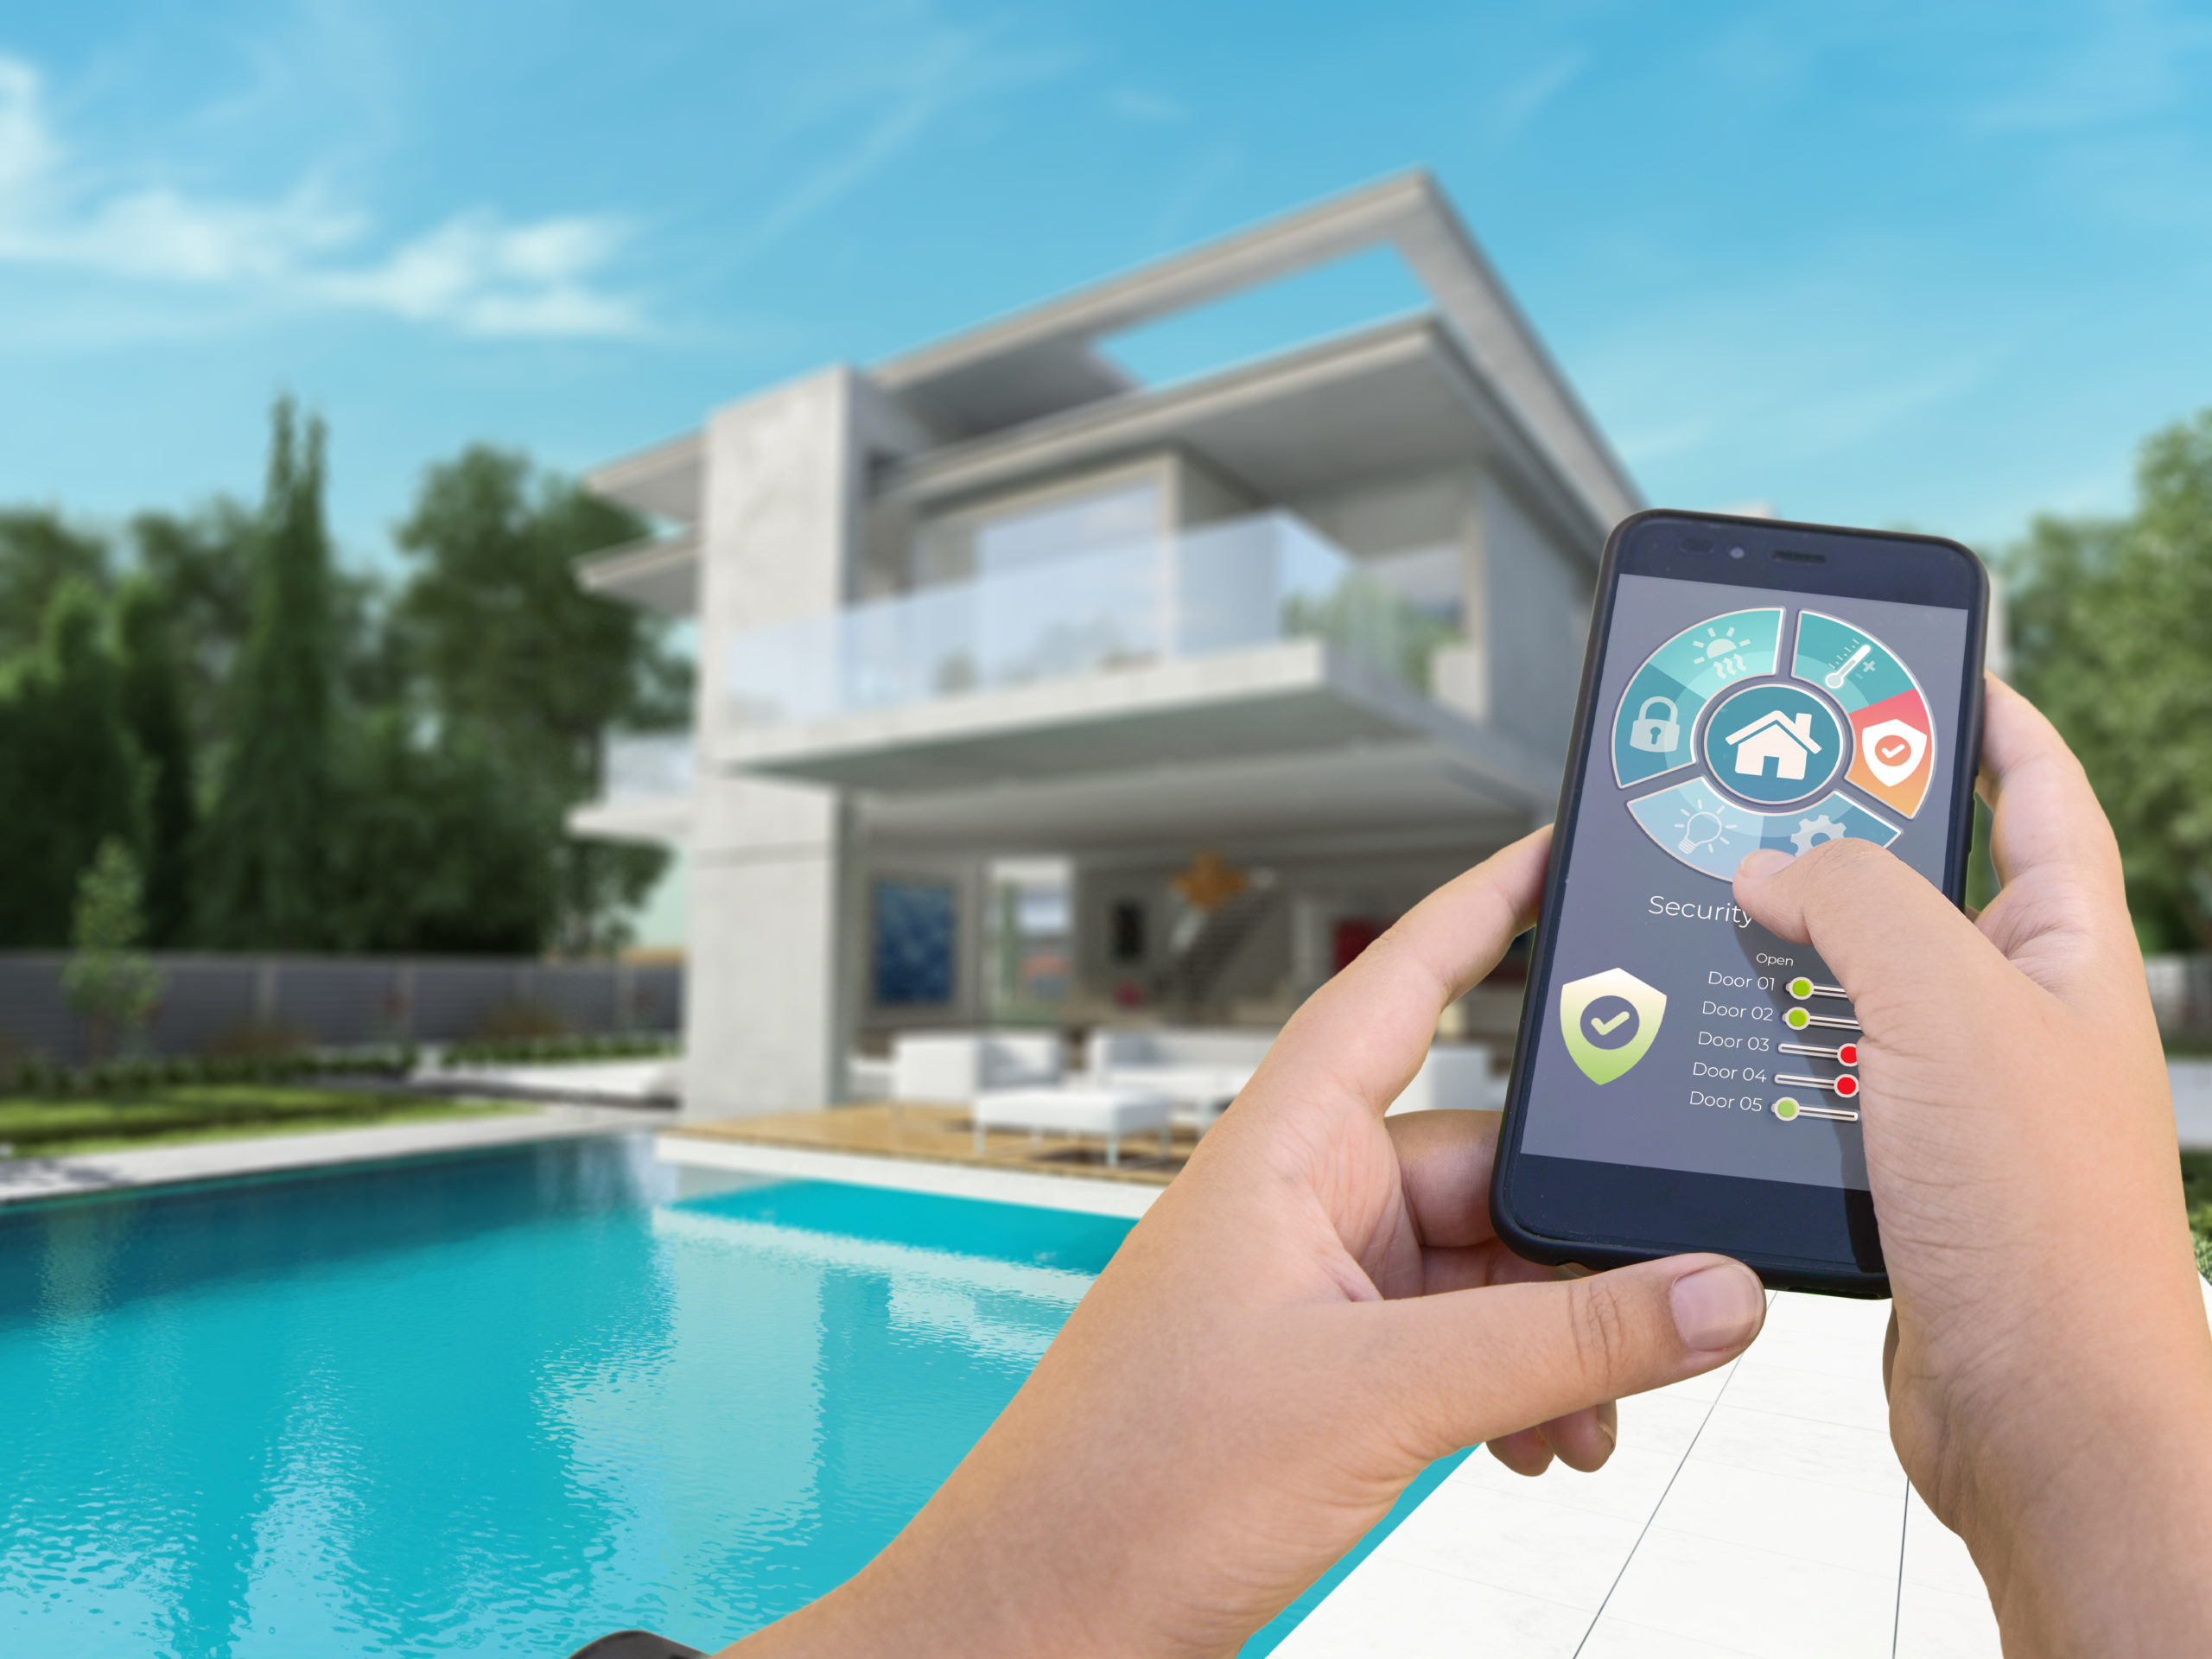 Smart pool technology, consisting of connected devices and systems that enable remote monitoring, control, and automation of various pool functions such as filtration, temperature, lighting, and water chemistry.